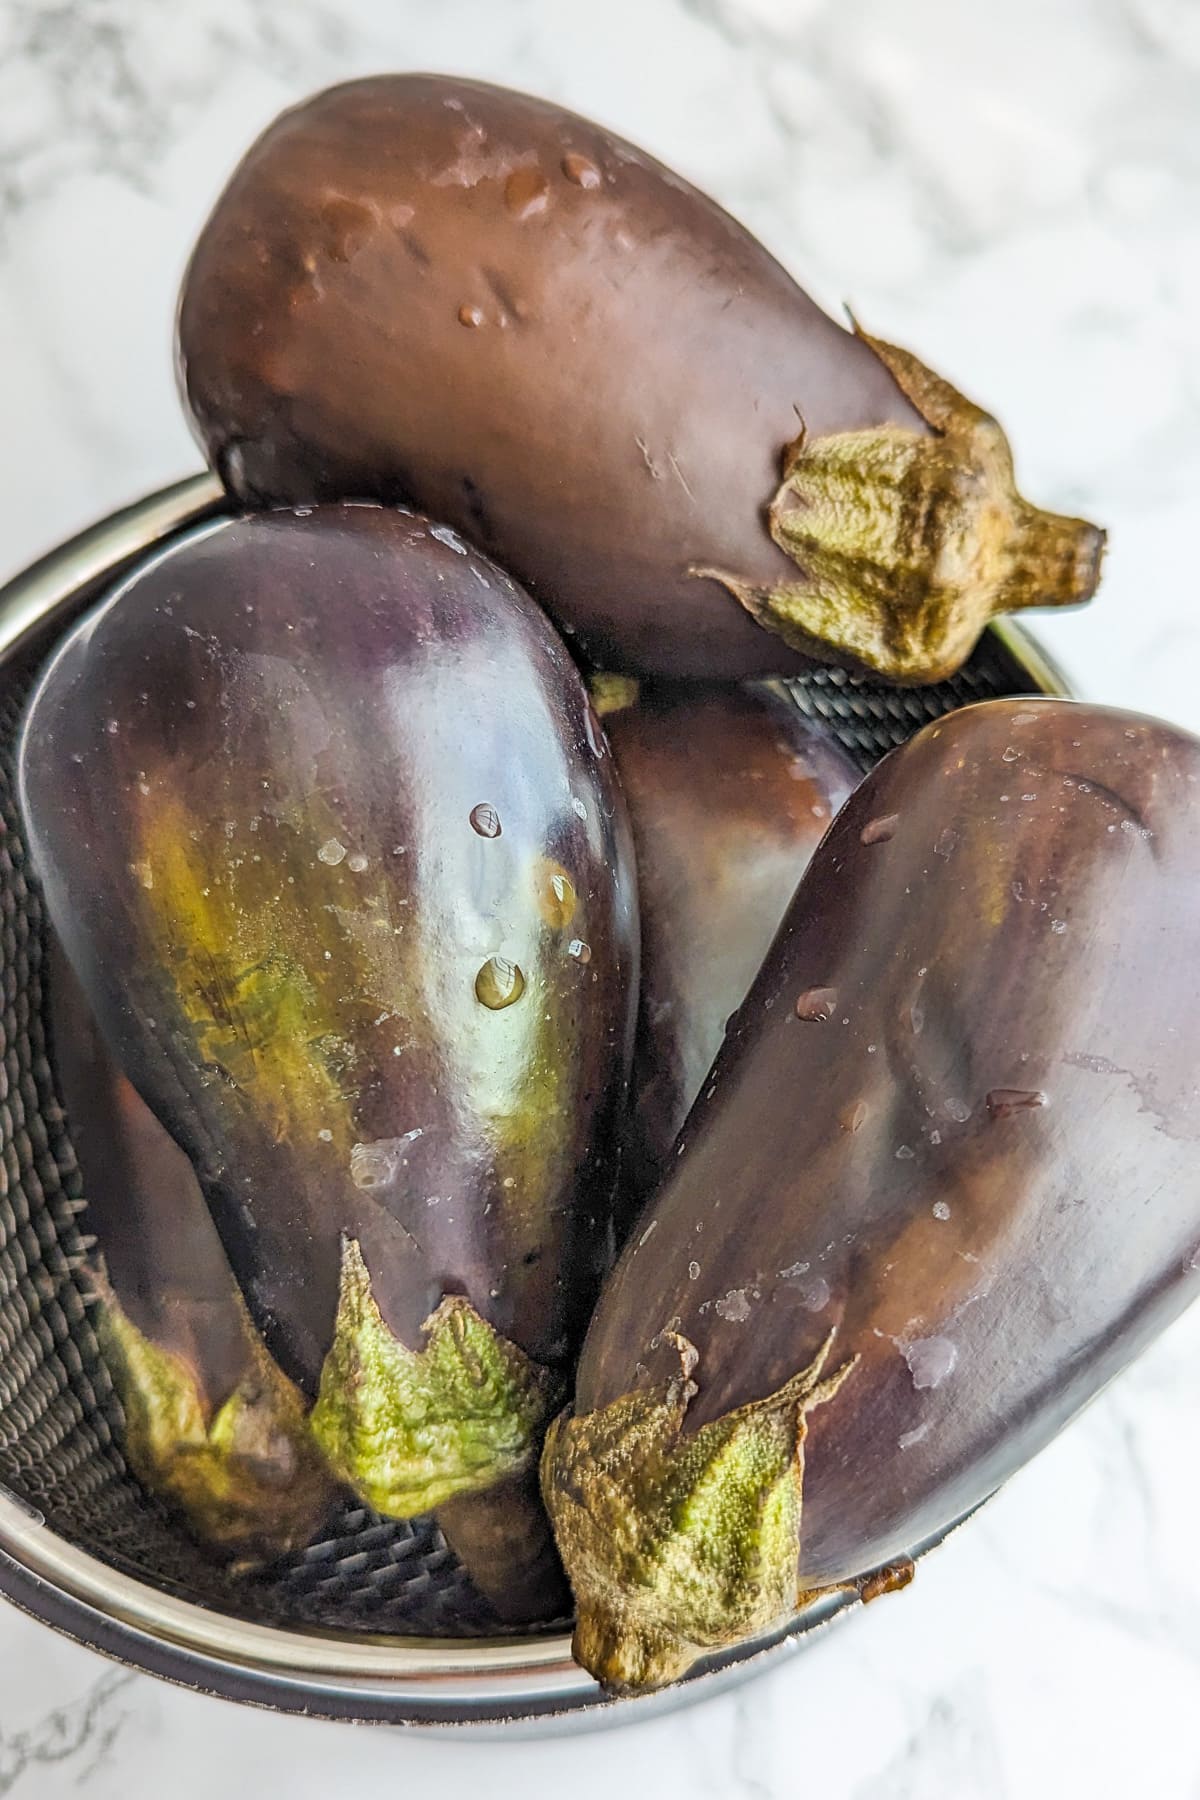 Eggplants sitting on a sieve on a white marble table.